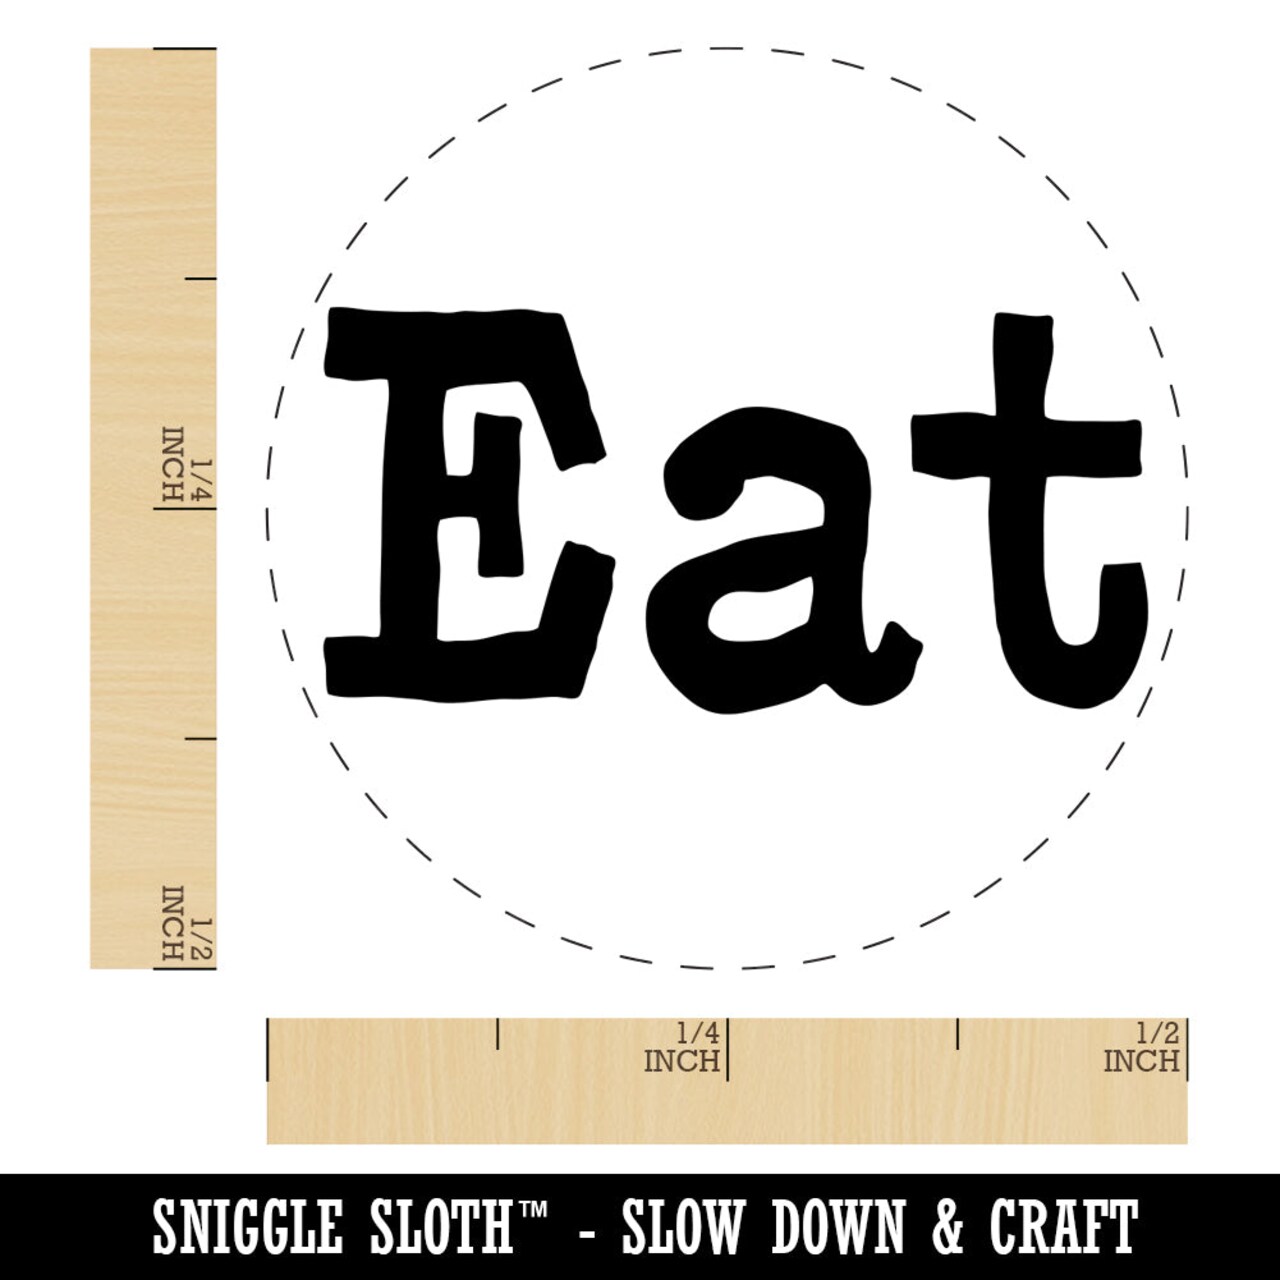 Eat Fun Text Self-Inking Rubber Stamp for Stamping Crafting Planners